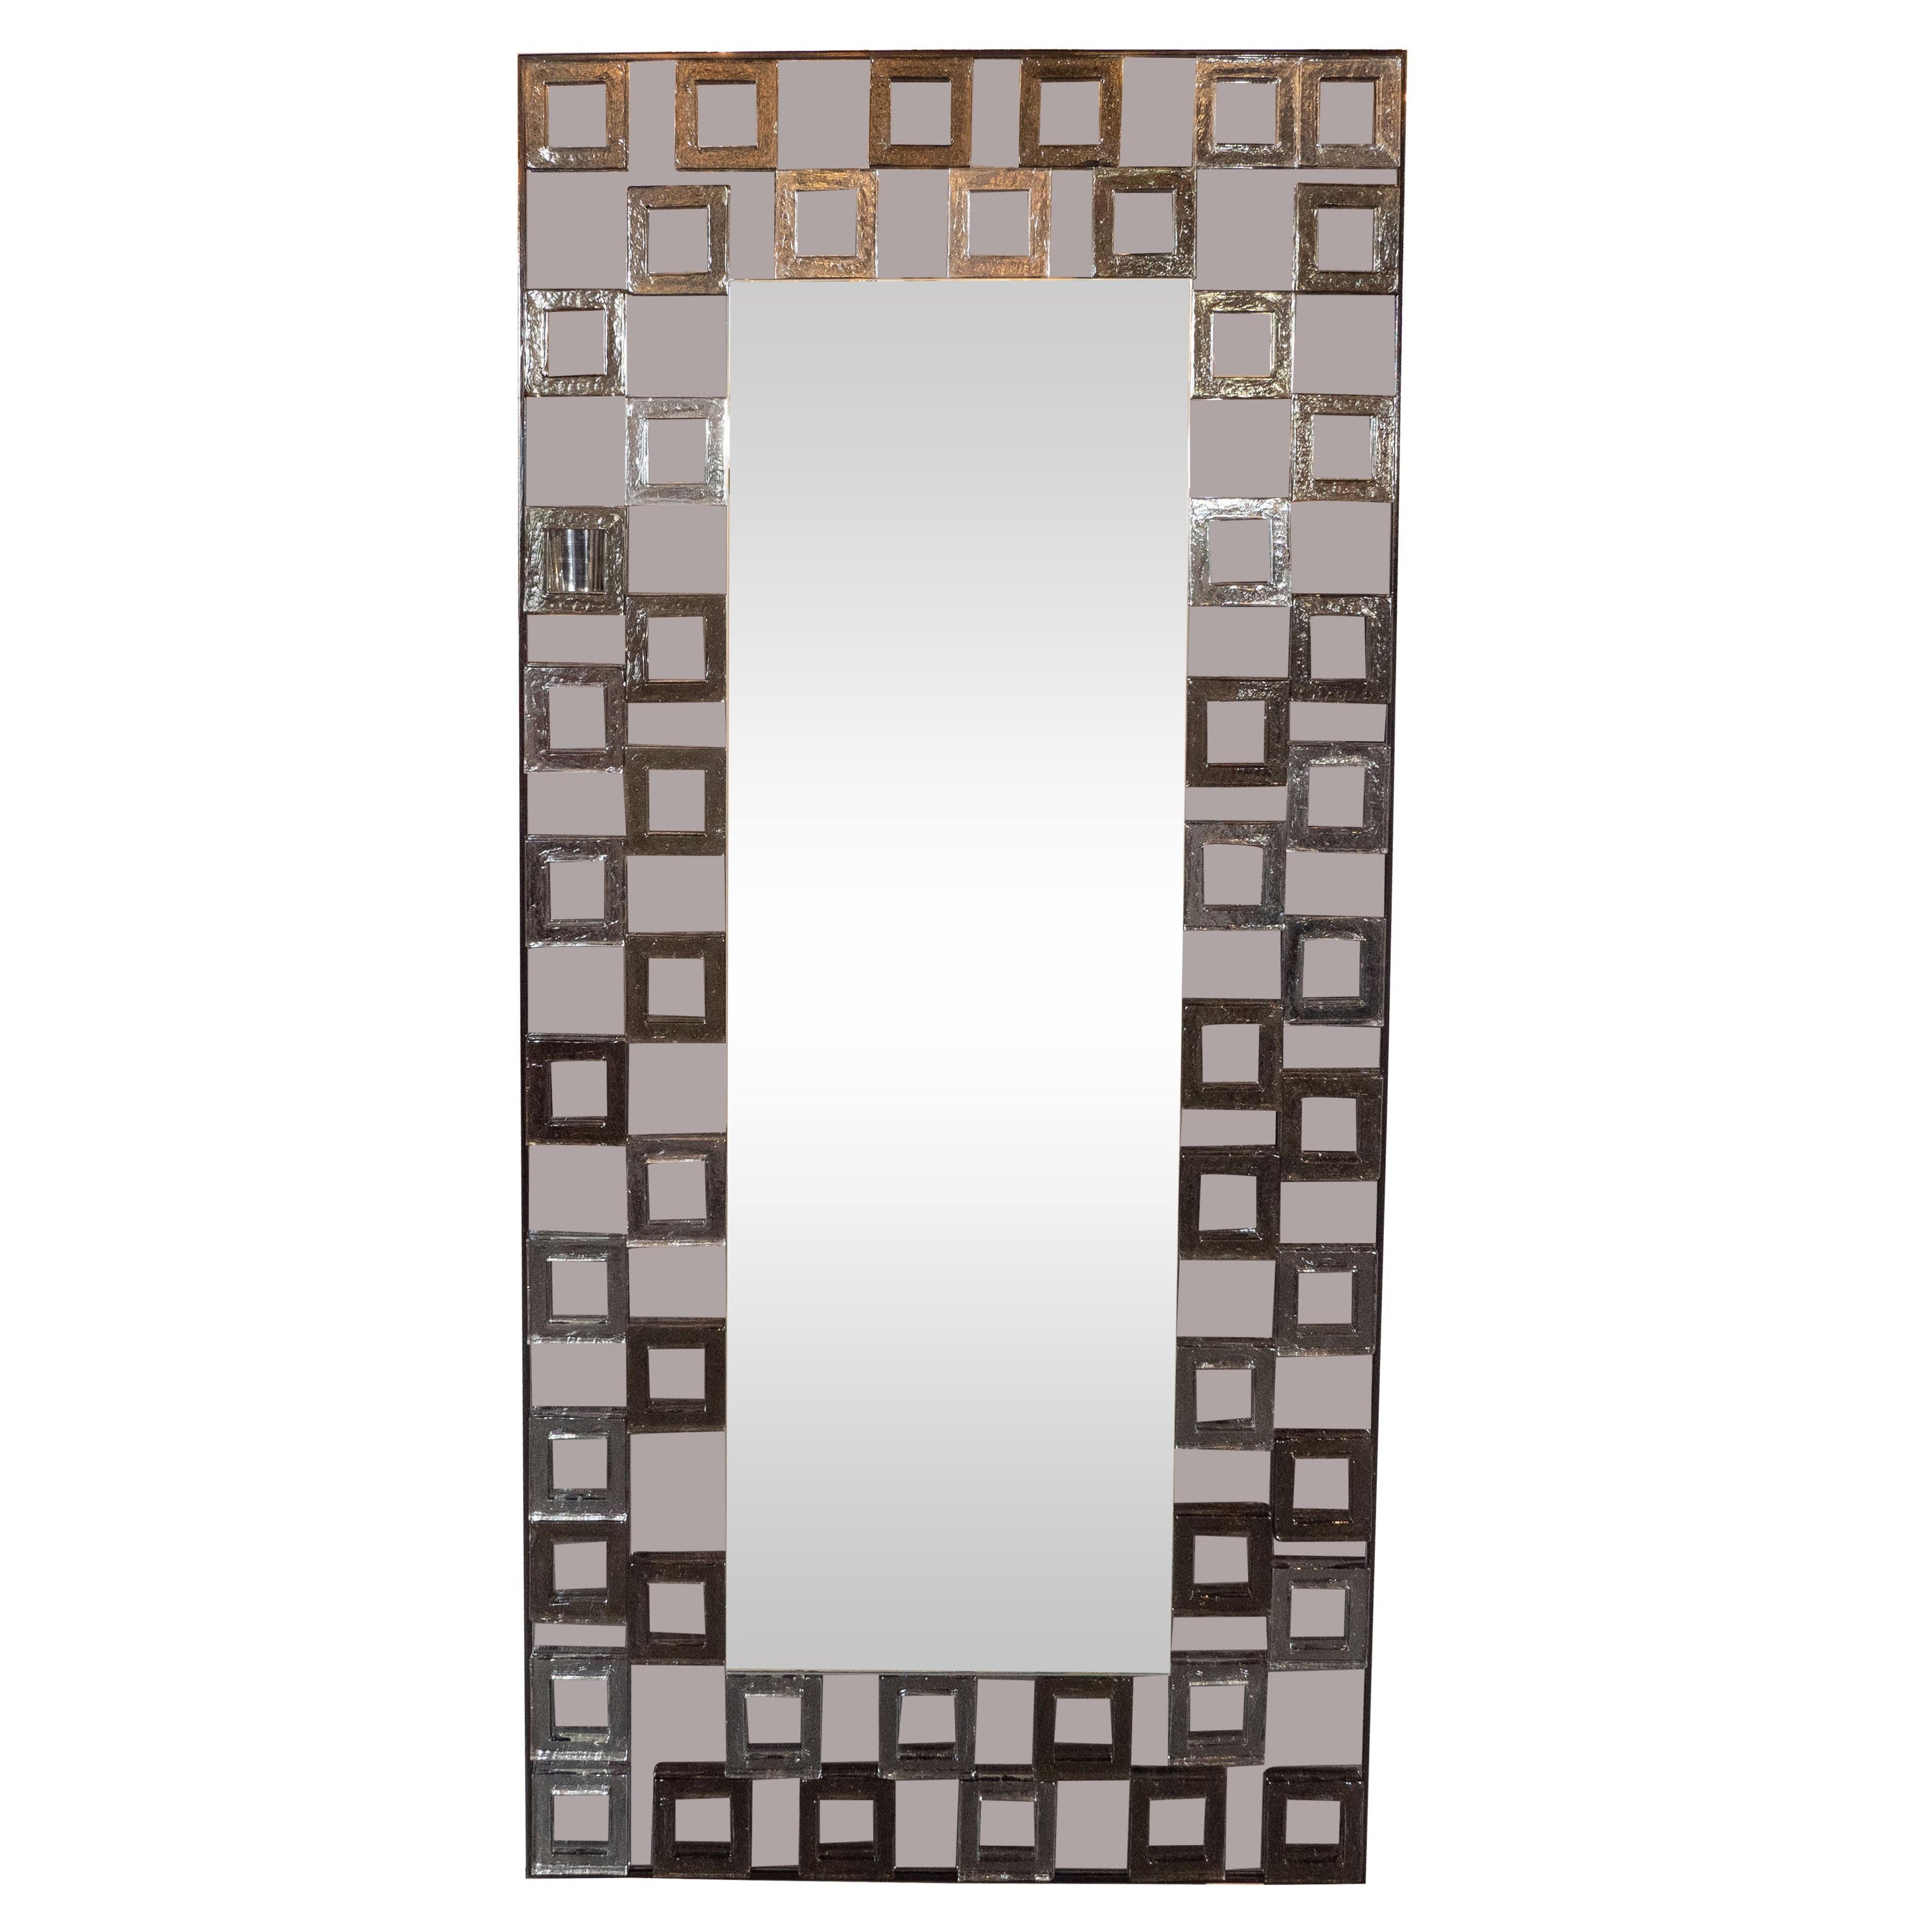 Modernist Handblown Murano Smoked Mirror with Repeating Square Motifs